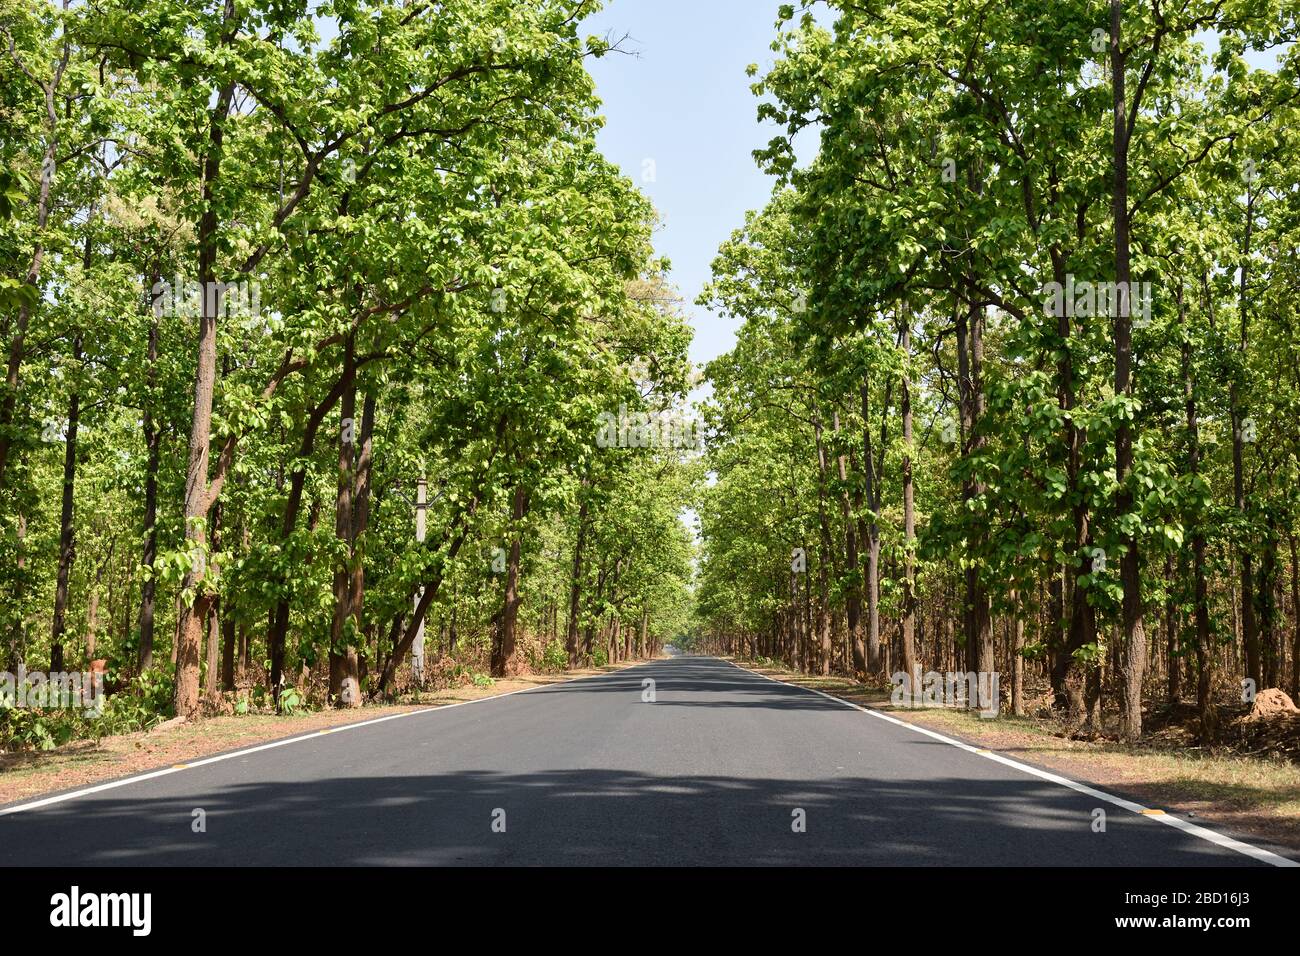 jhargarm forest in india Stock Photo